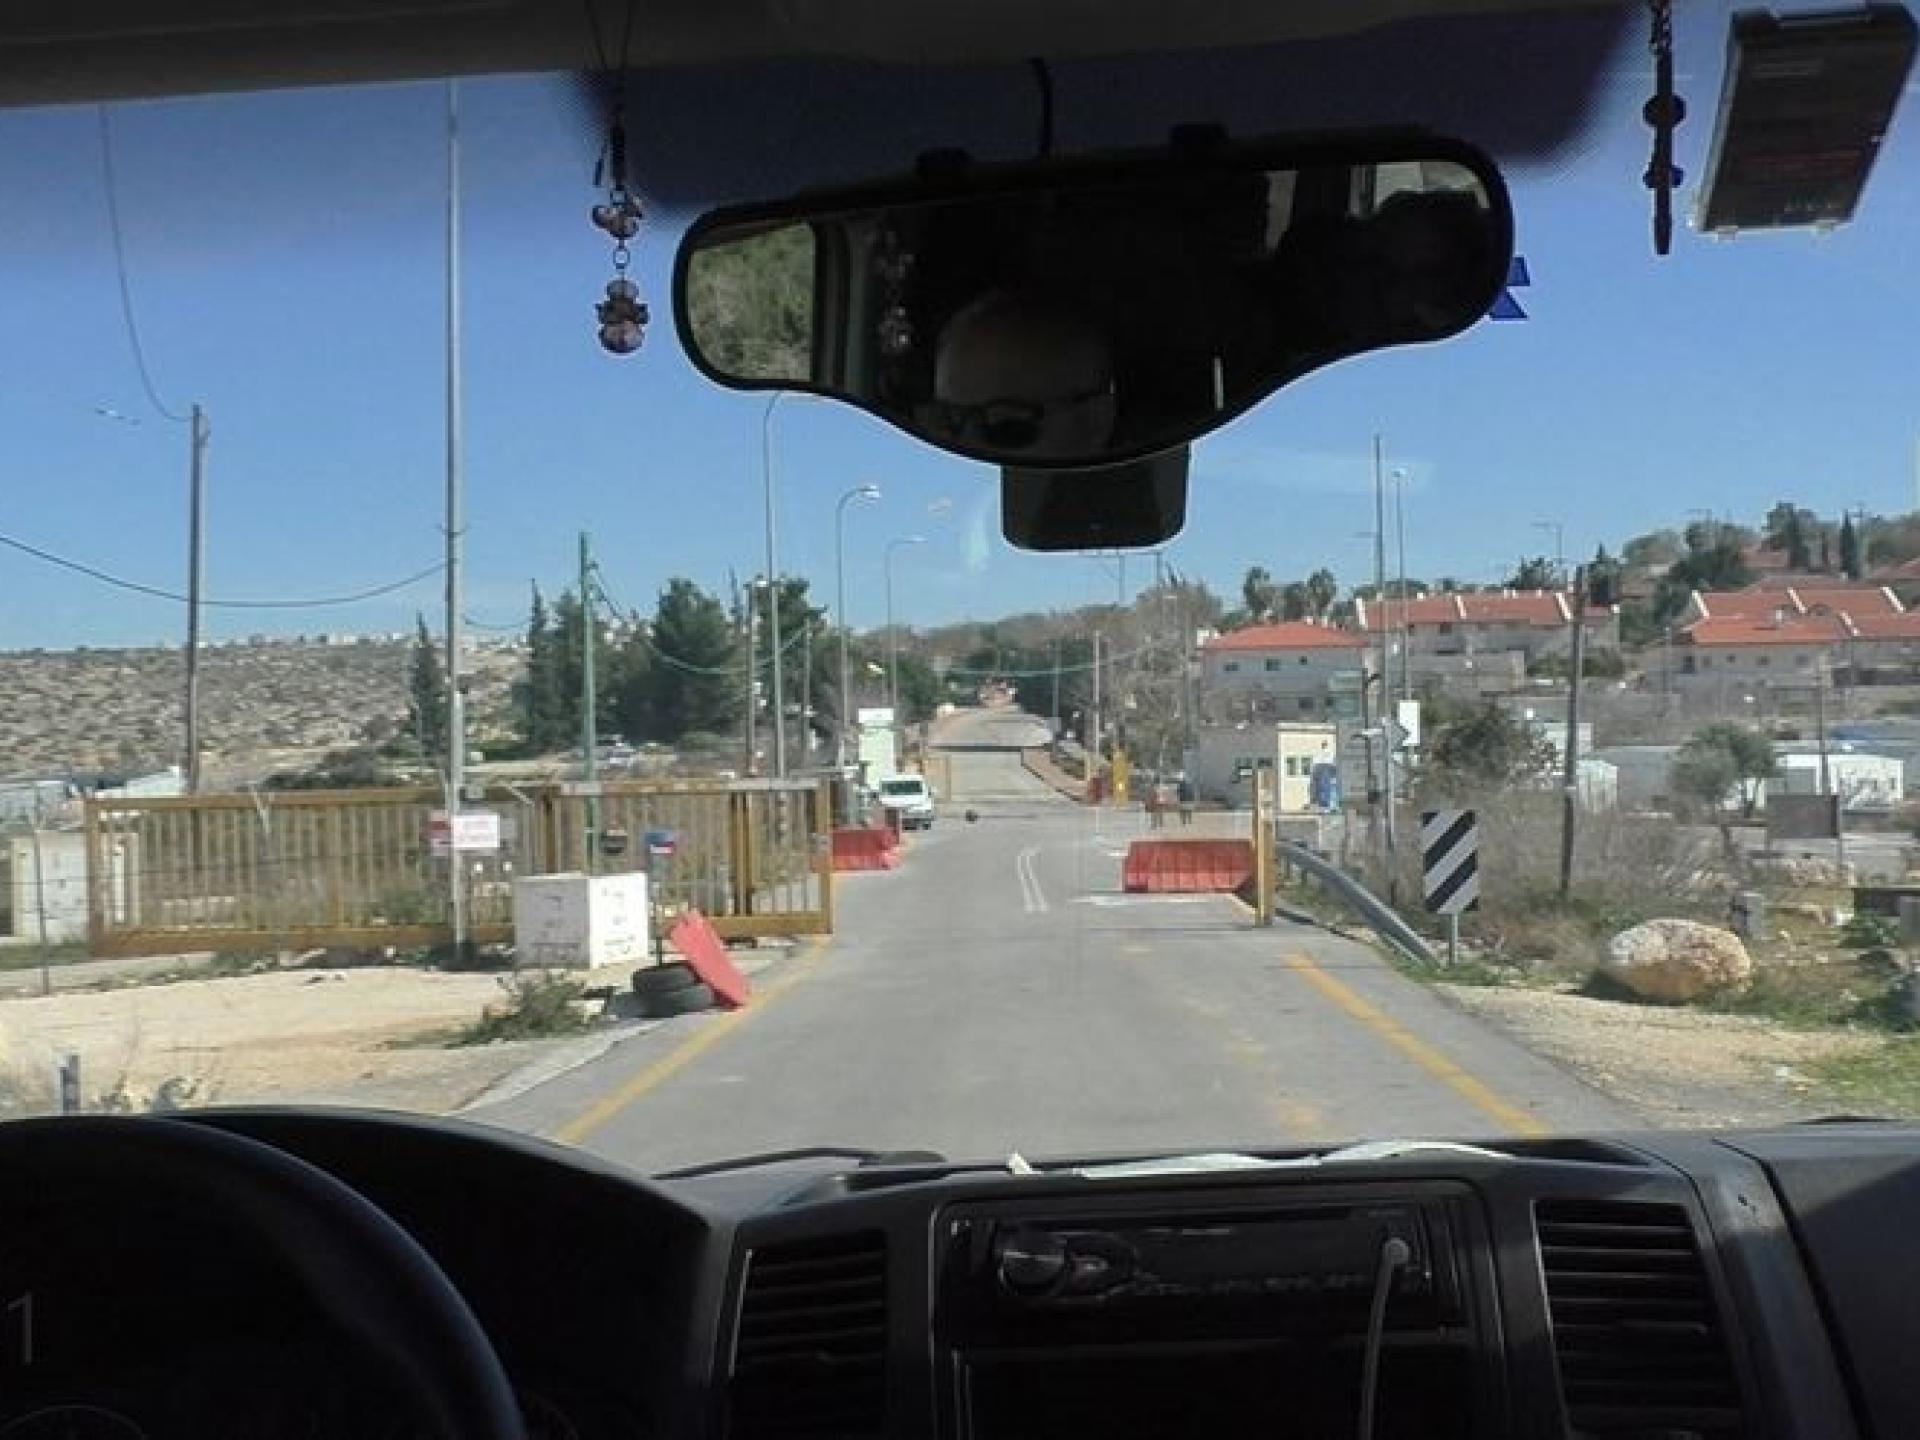 Highway 450: another apartheid checkpoint against Palestinians